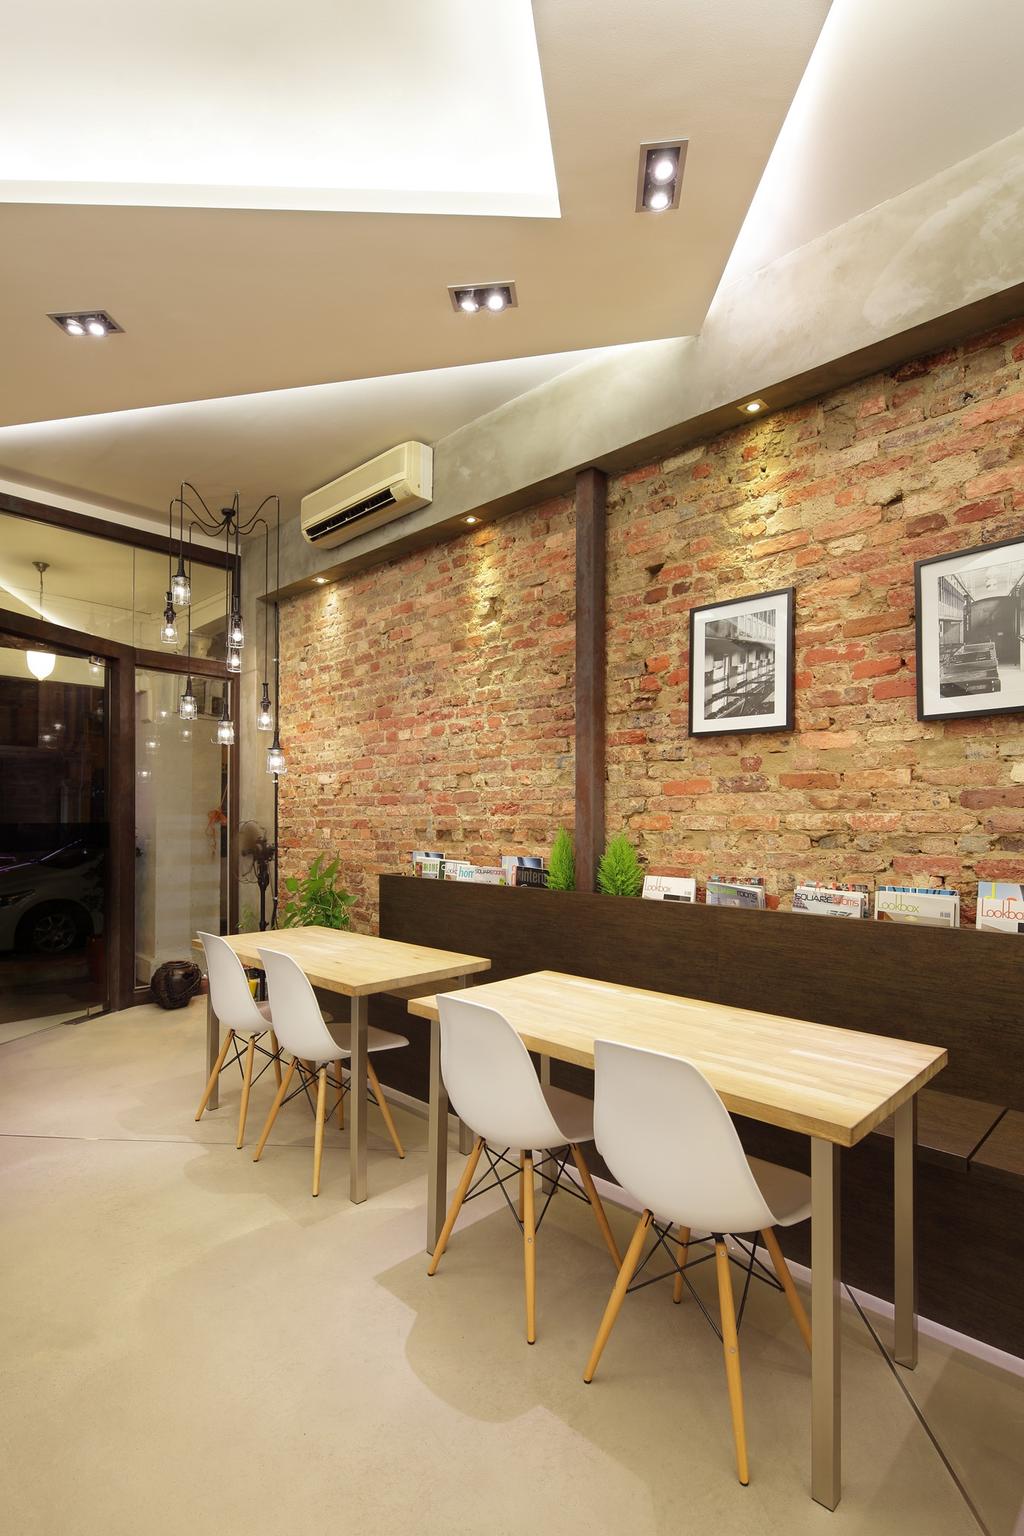 318 Joo Chiat Road, Commercial, Interior Designer, Space Define Interior, Modern, Brick Wall, Raw, Hanging Light, Bench, Table, Chair, Woodwork, Wood Laminate, Wood, Laminate, False Ceiling, Concealed Lighting, Furniture, Dining Room, Indoors, Interior Design, Room, Cafe, Restaurant, Plywood, Dining Table